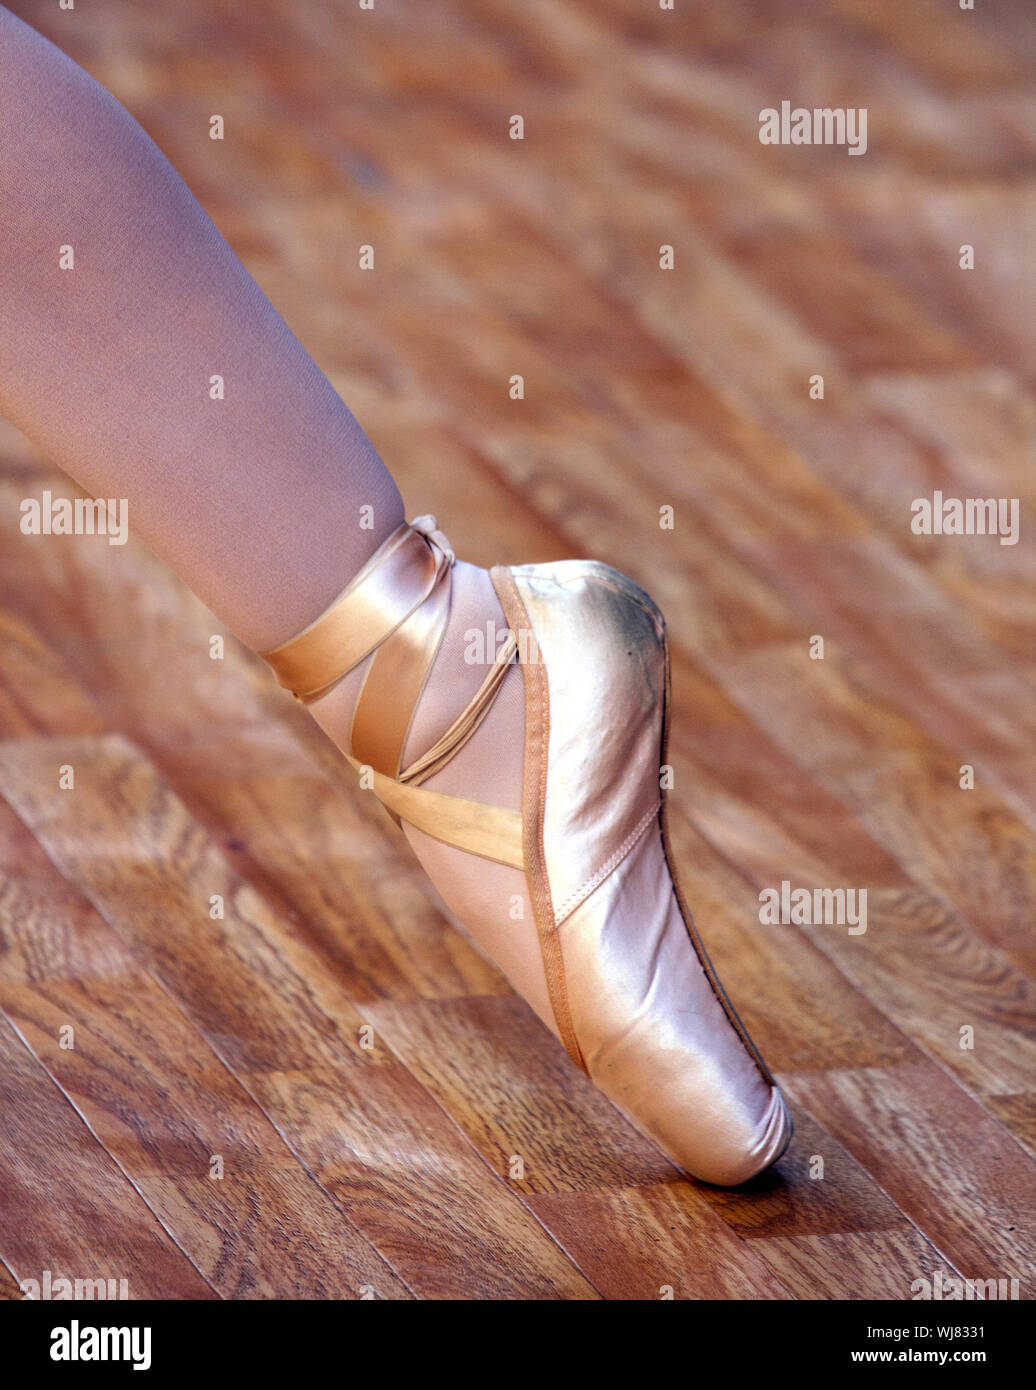 Low Section Of Woman Wearing Ballet Shoes On Hardwood Floor Stock Photo